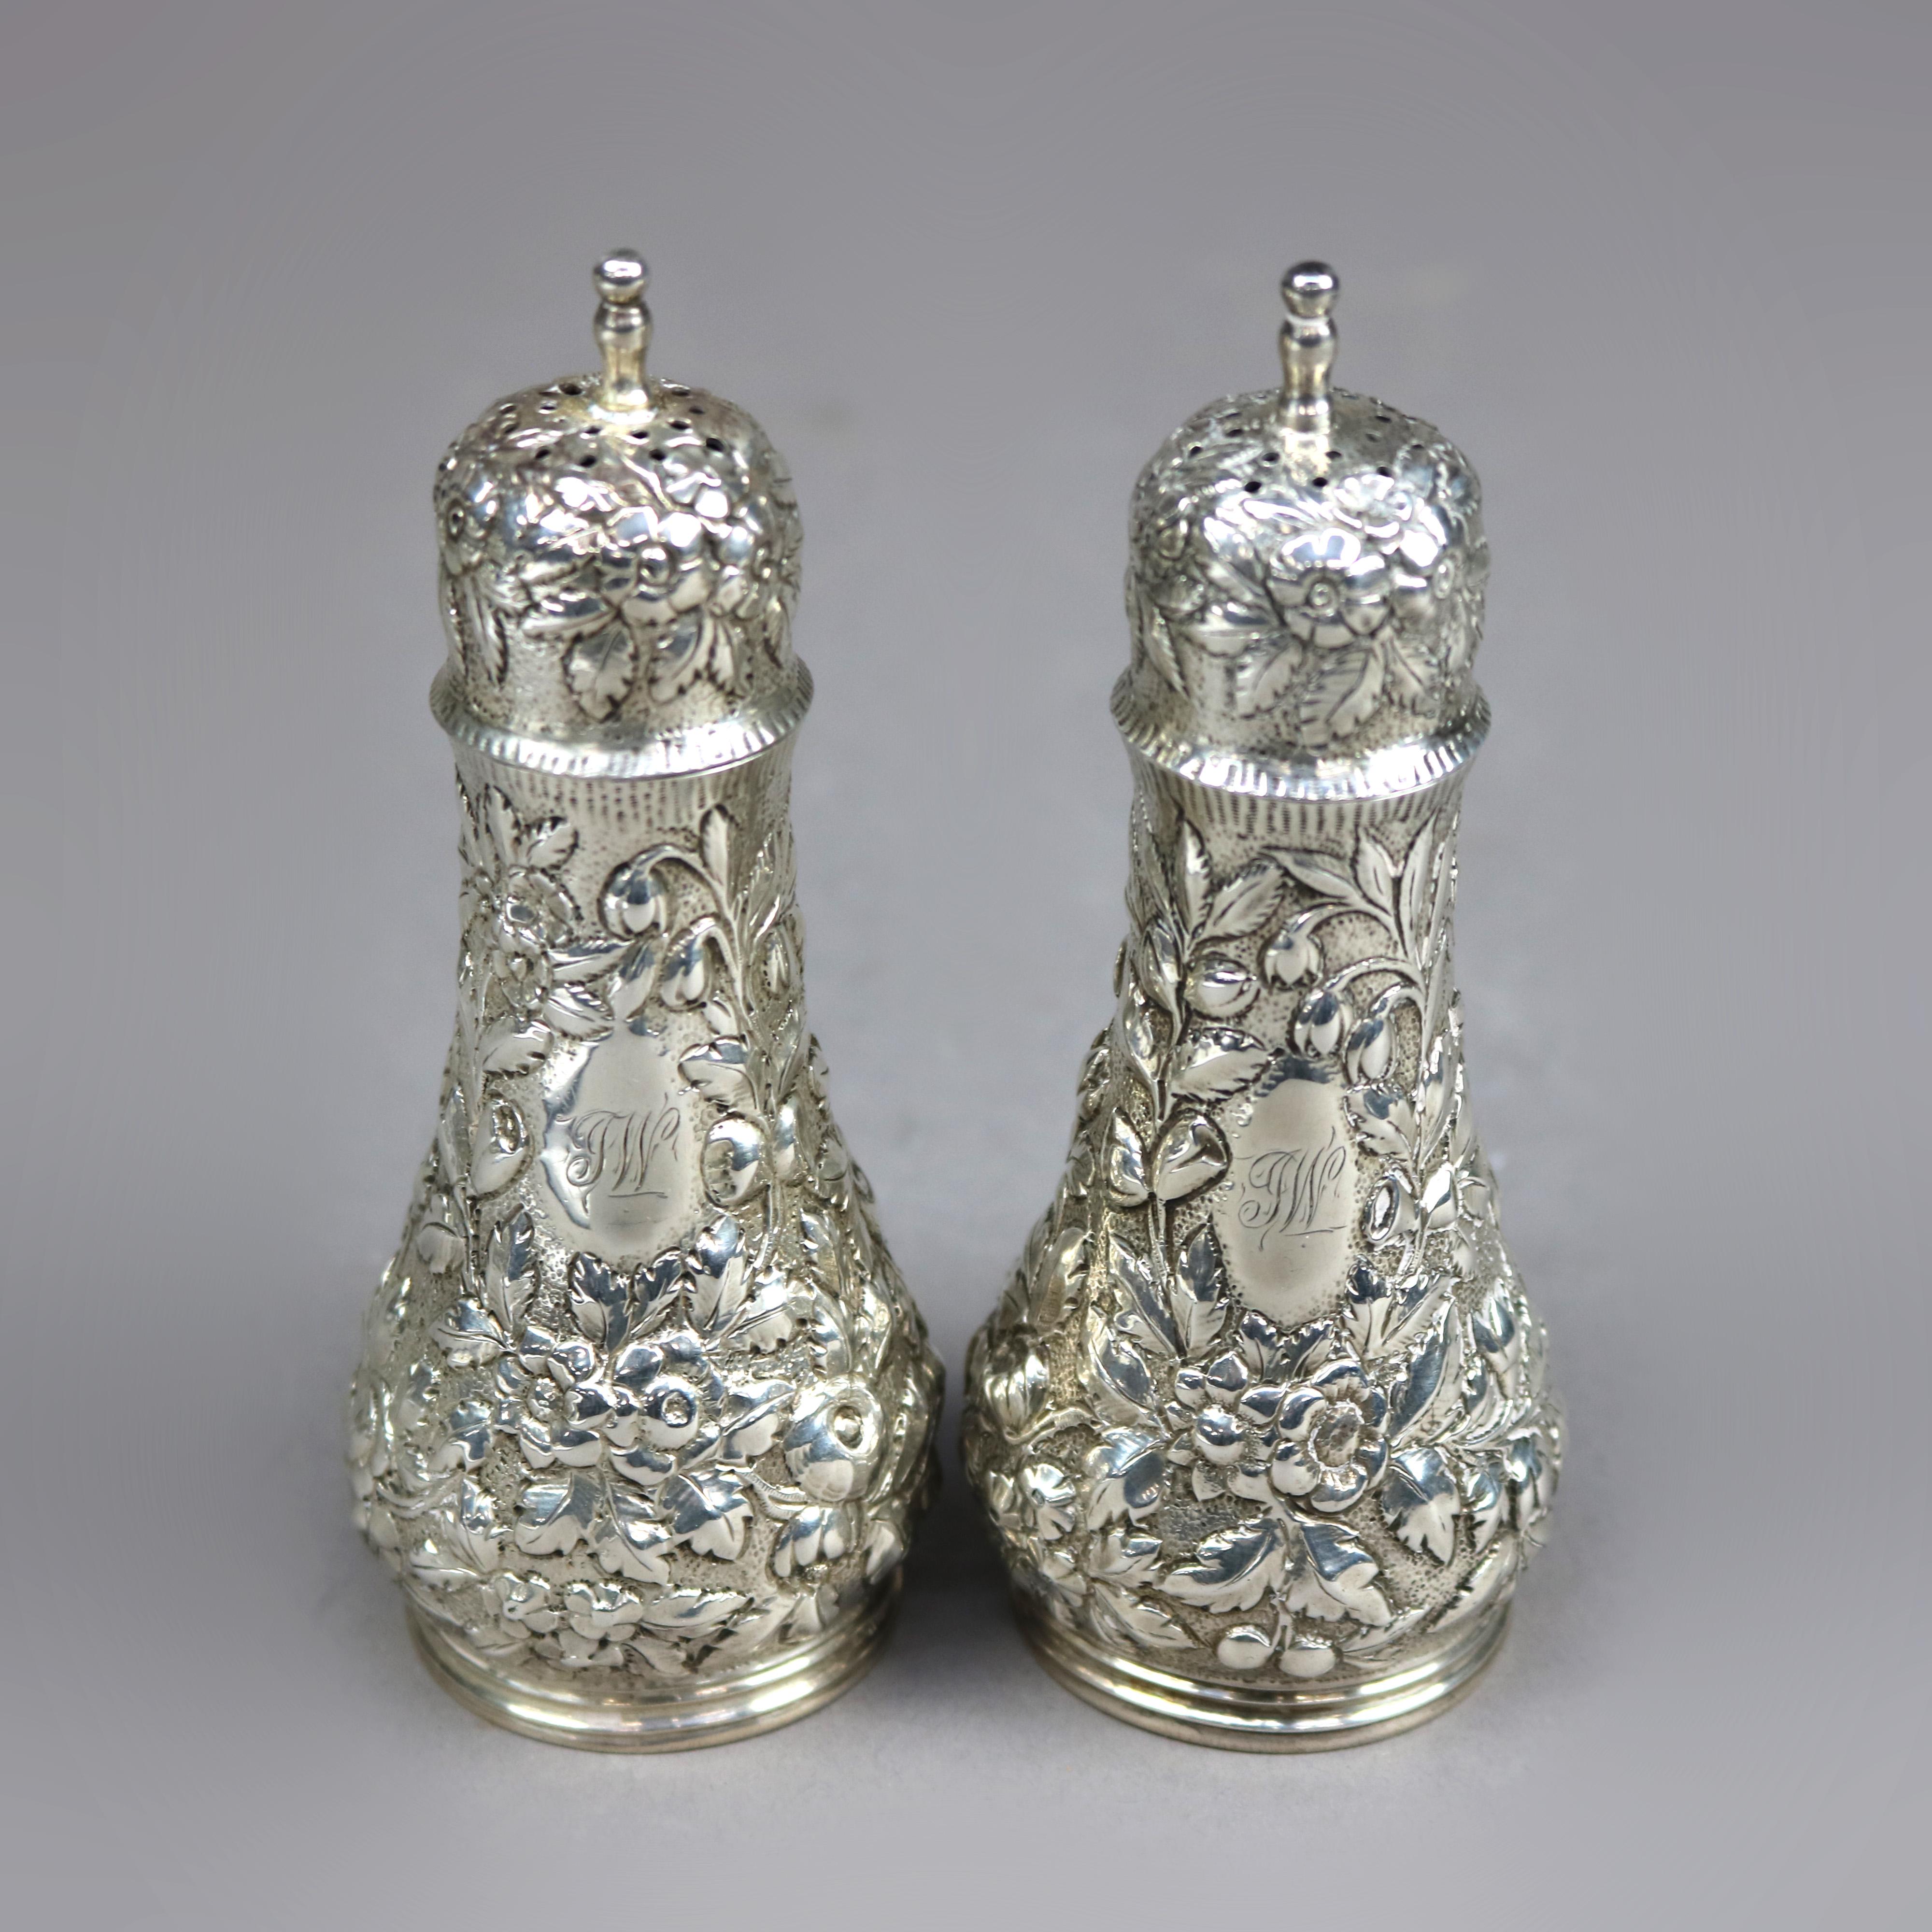 American Pair Floral Repousse Sterling Silver Salt & Peppers by S. Kirk & Sons, c1890